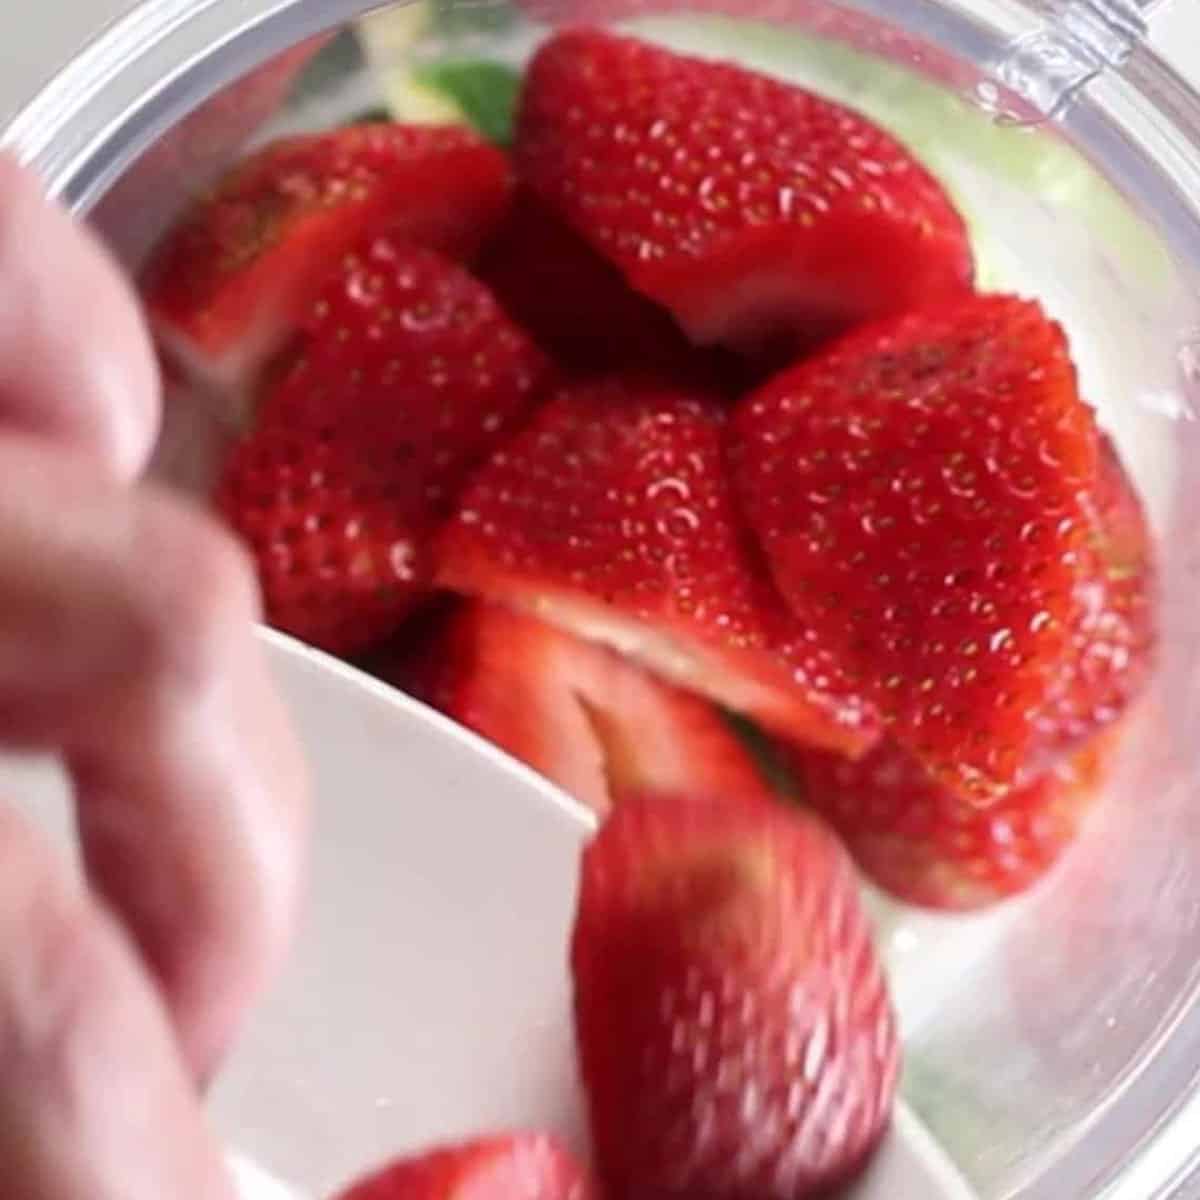 strawberries added to a blender.